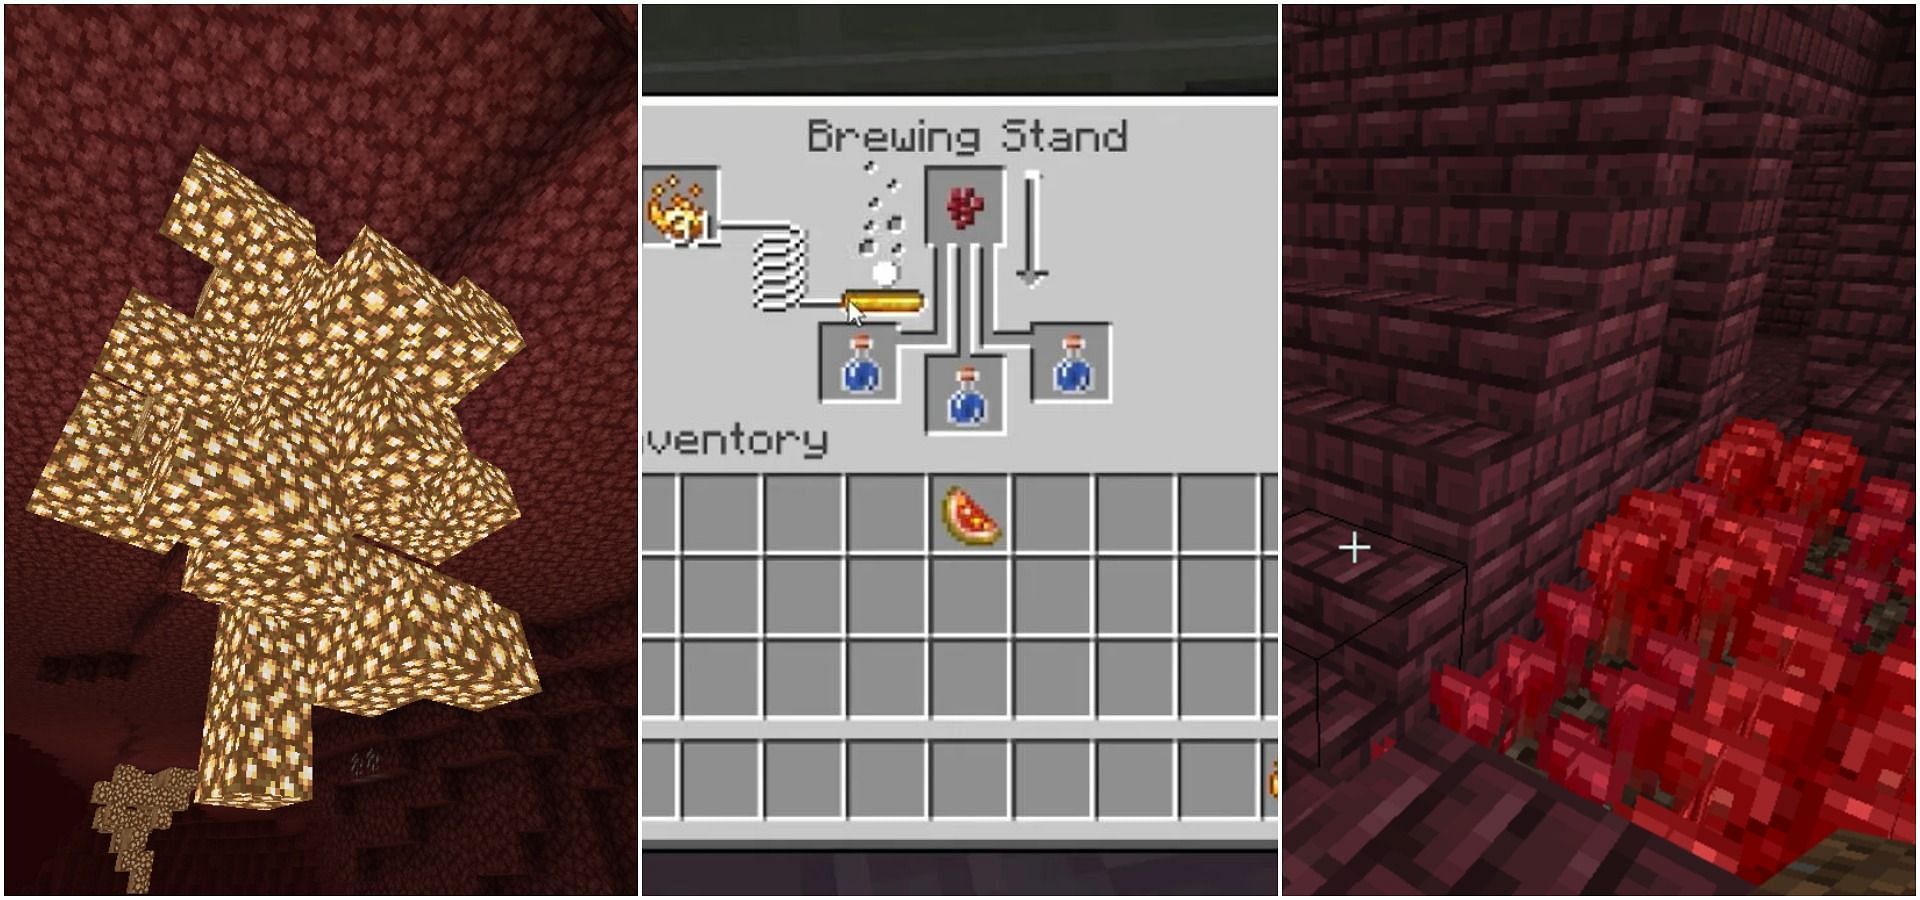 Items from Nether to brew potions (Image via Minecraft)